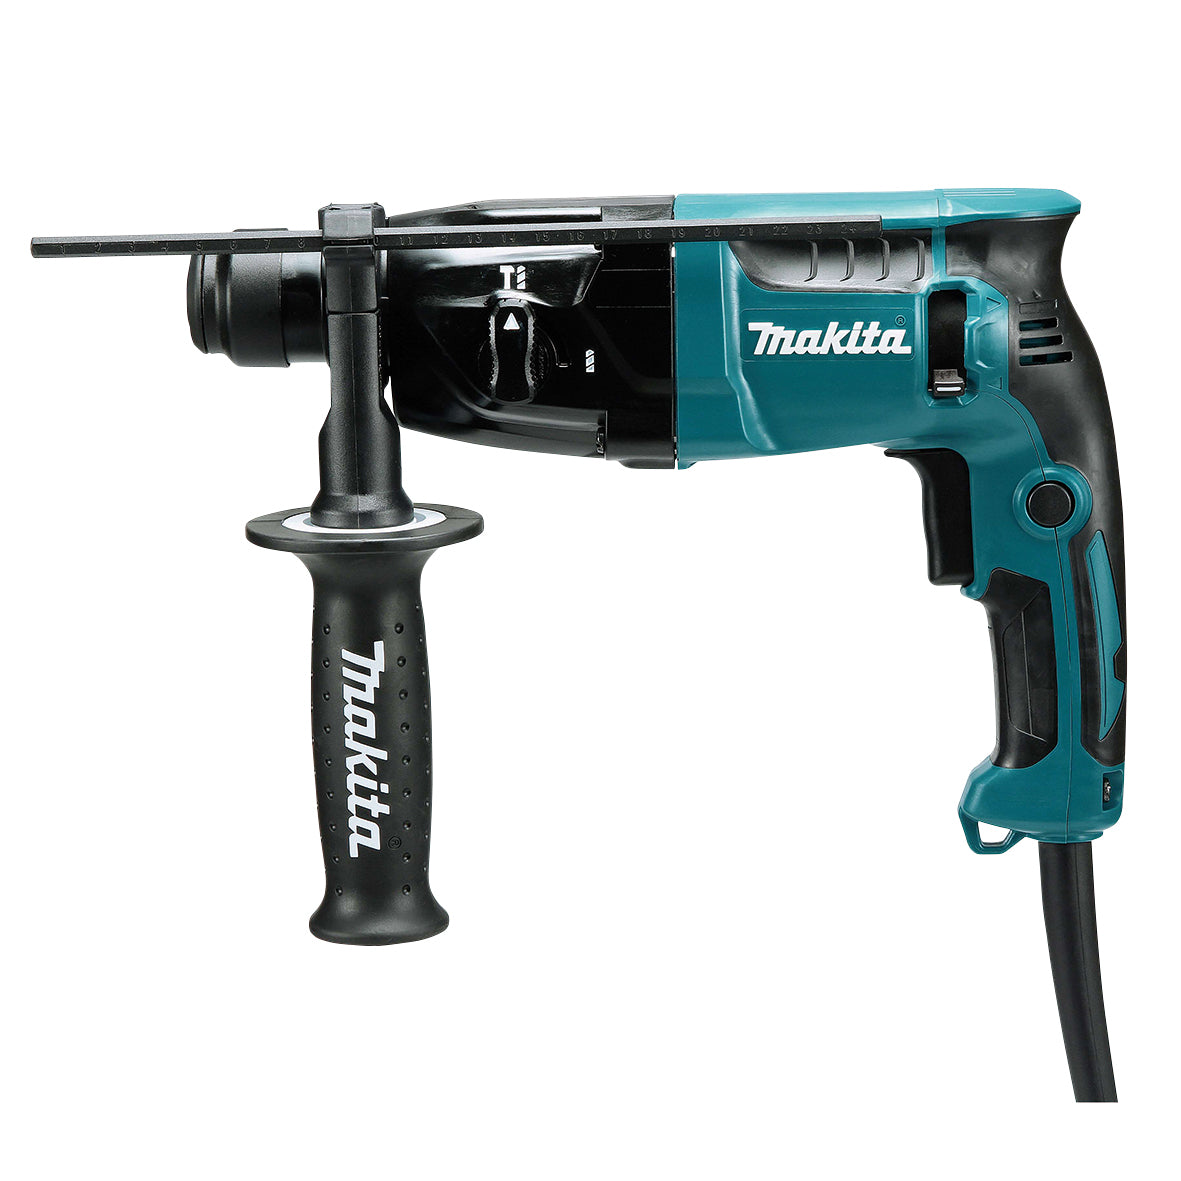 470W 18mm SDS-Plus Rotary Hammer HR1840 by Makita